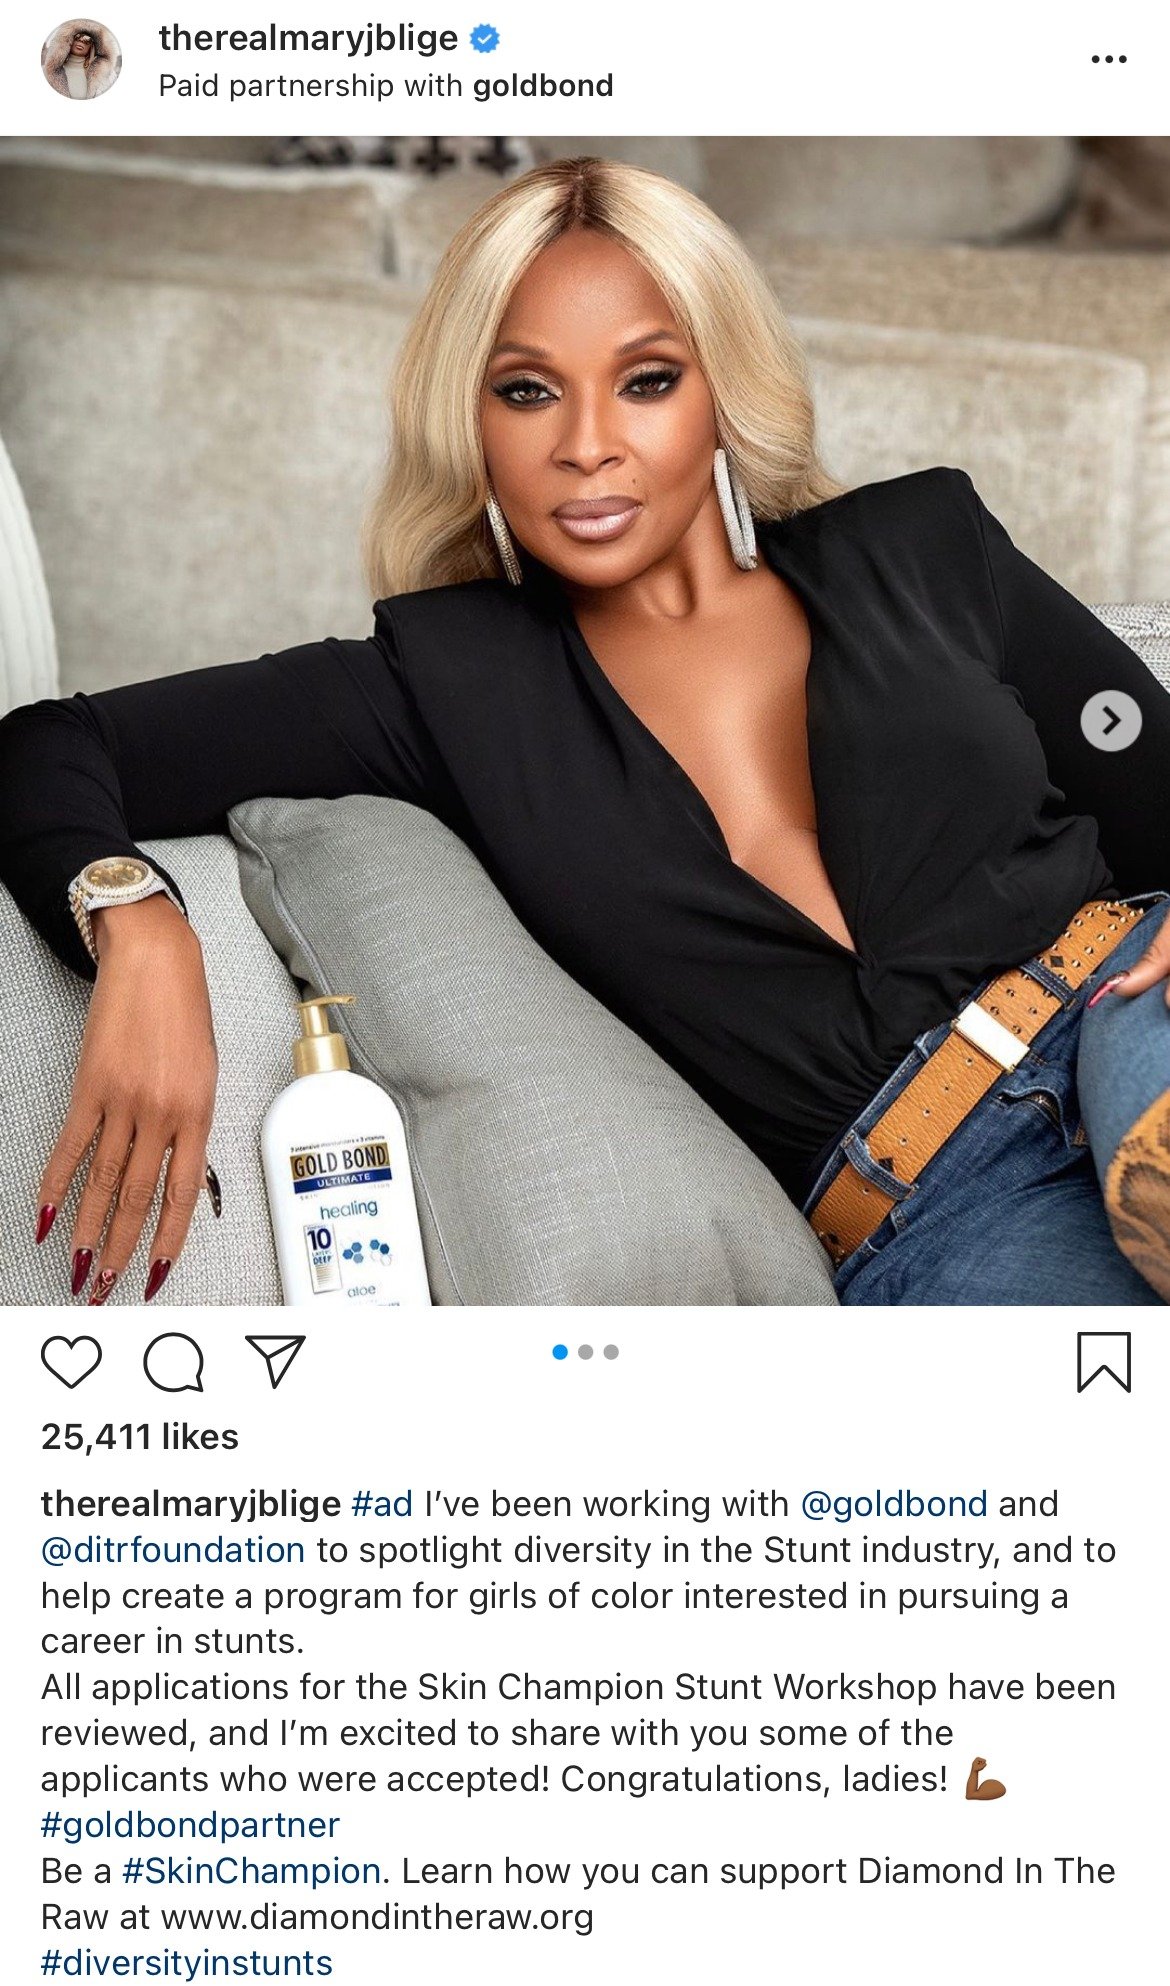 Mary J. Blige looking divine and youthful in her black top and eye-catching accessories. | Photo: instagram.com/therealmaryjblige